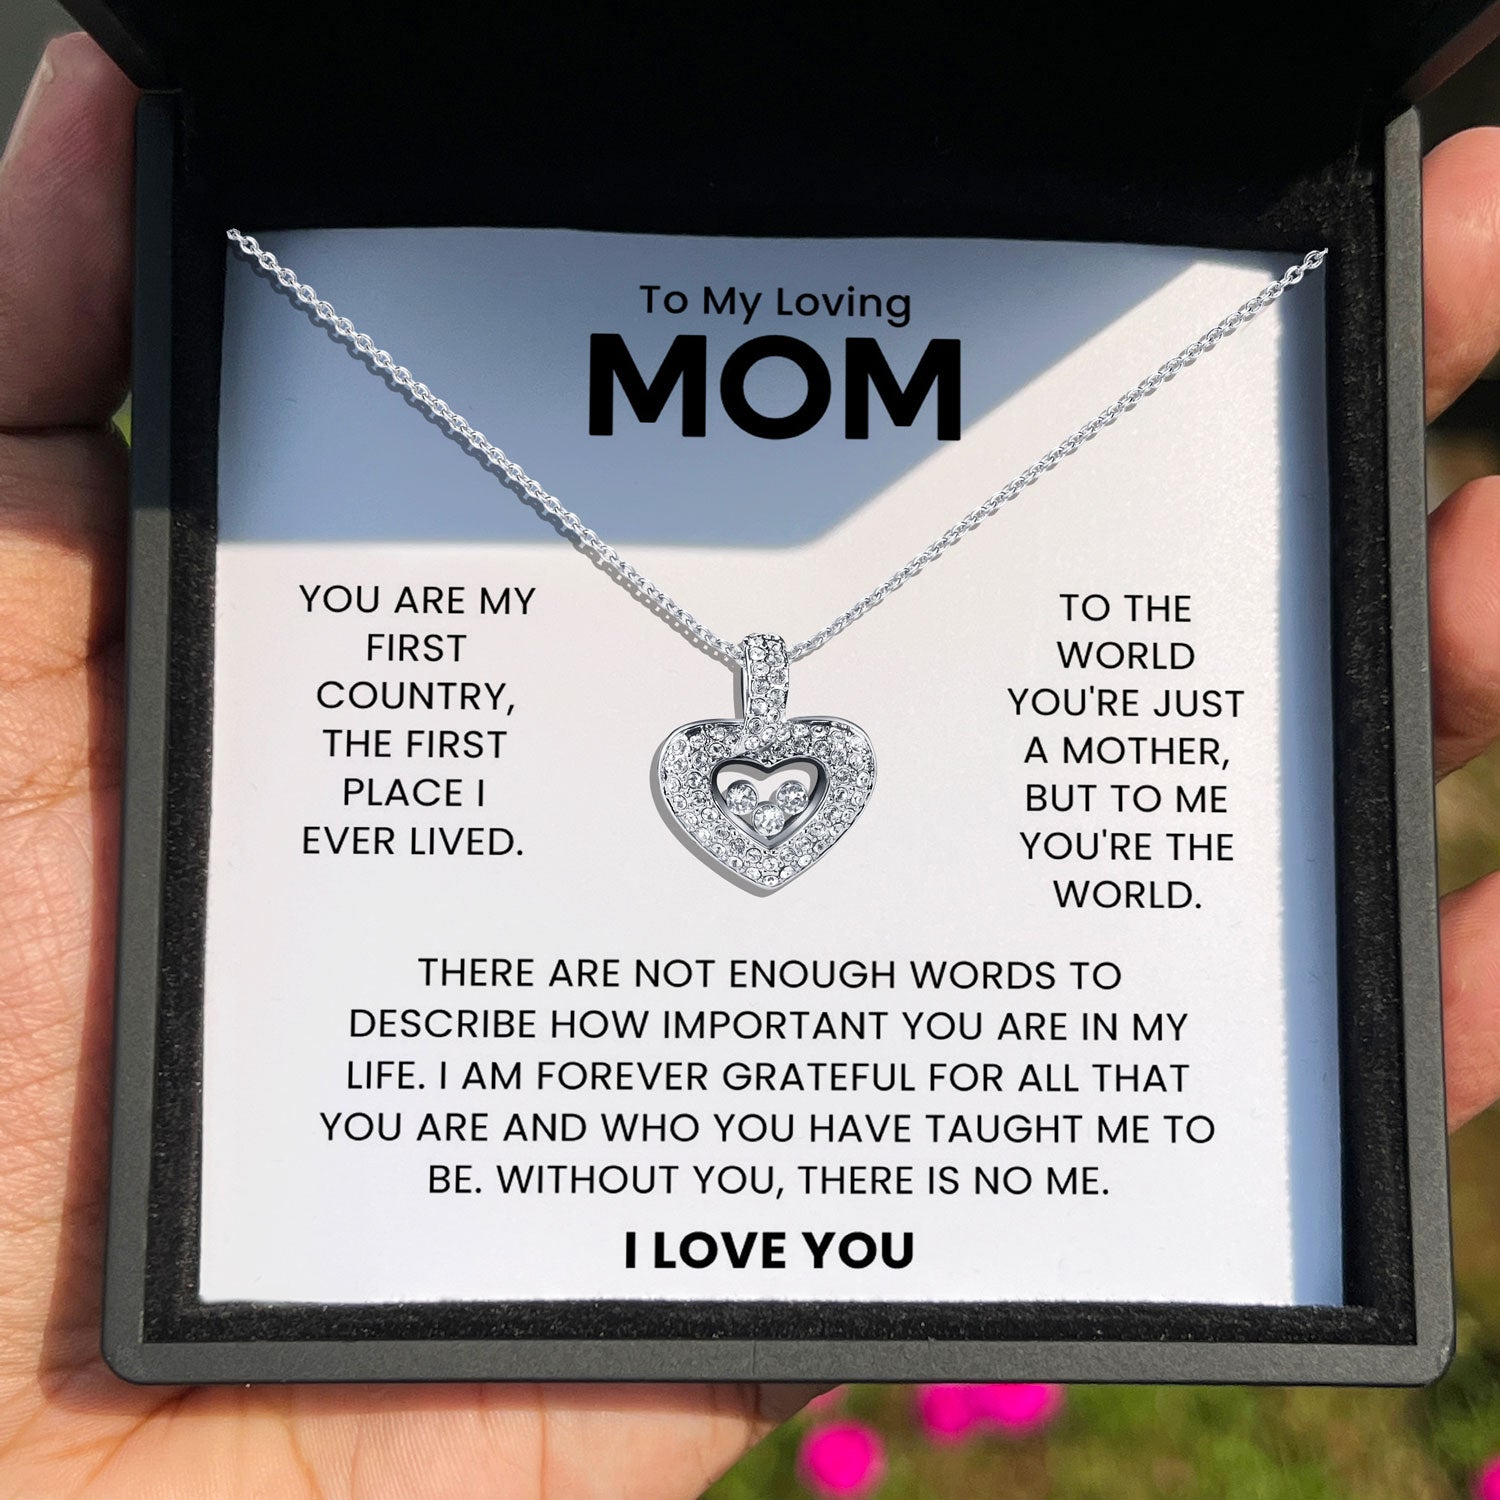 To My Loving Mom - You Are My First Country - Tryndi Floating Heart Necklace